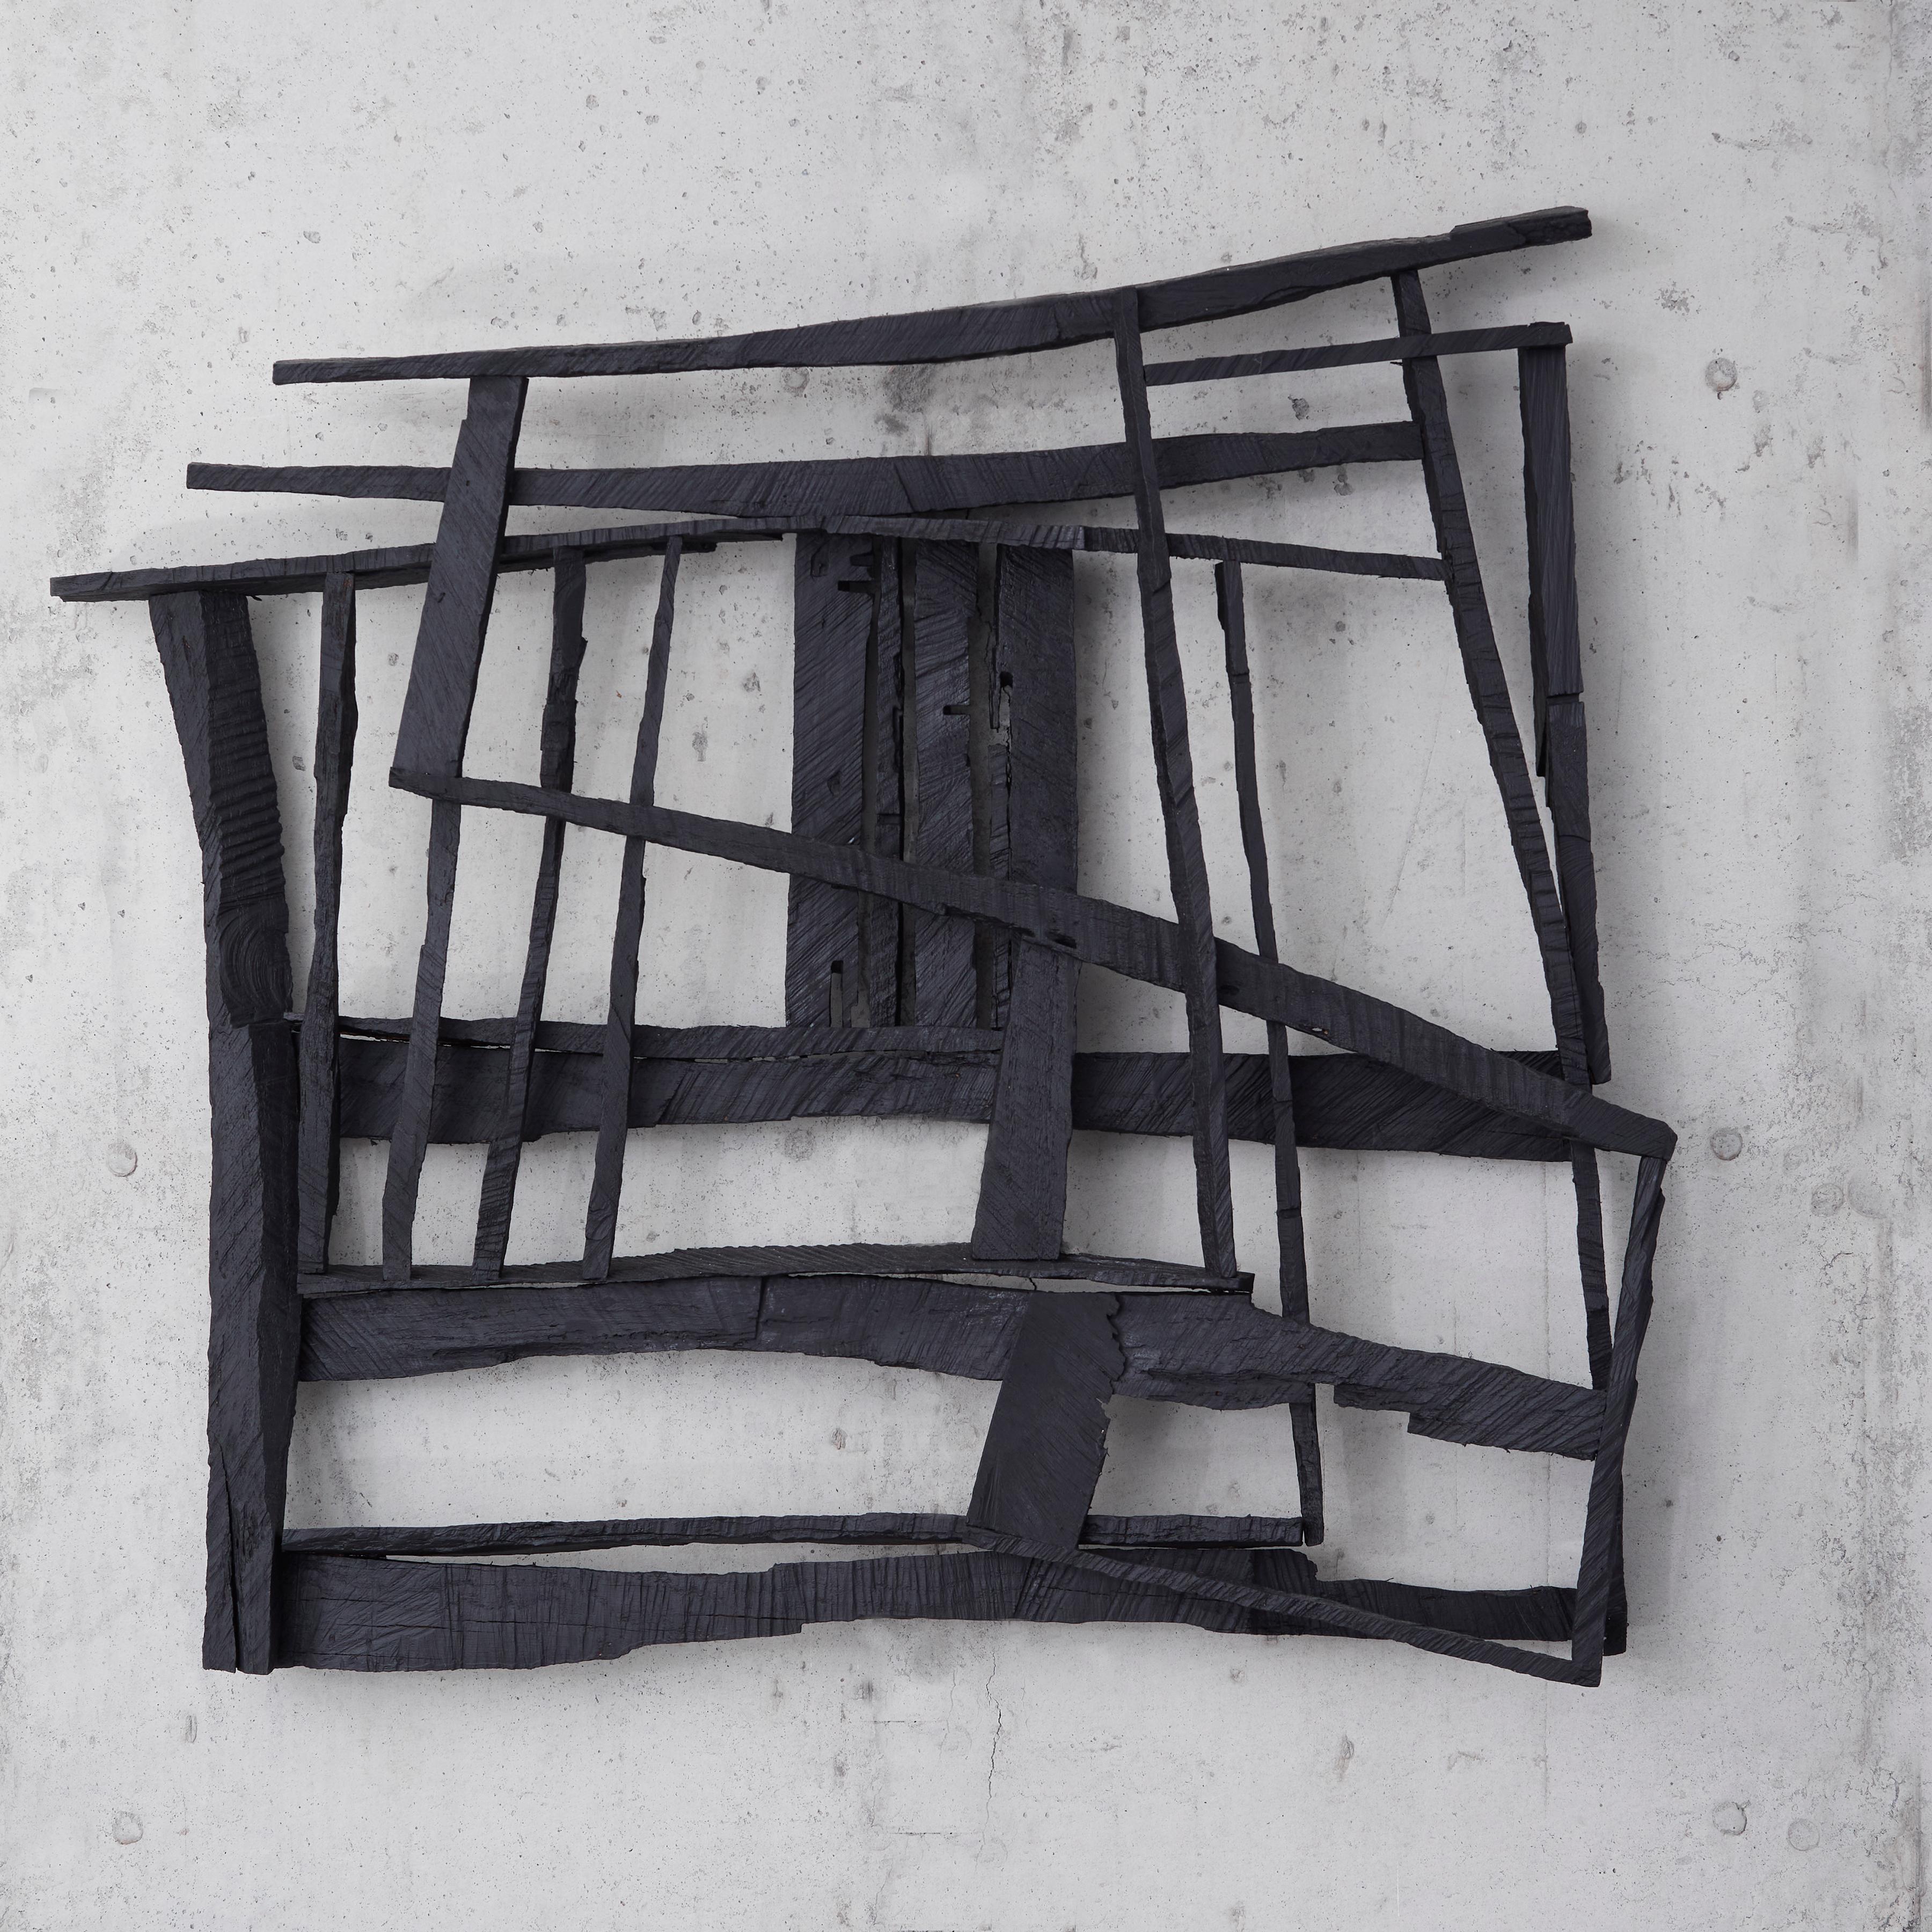 Joe Sultan Abstract Sculpture - Sunlight Shot Through Barbed Wire, black abstract geometric wooden sculpture